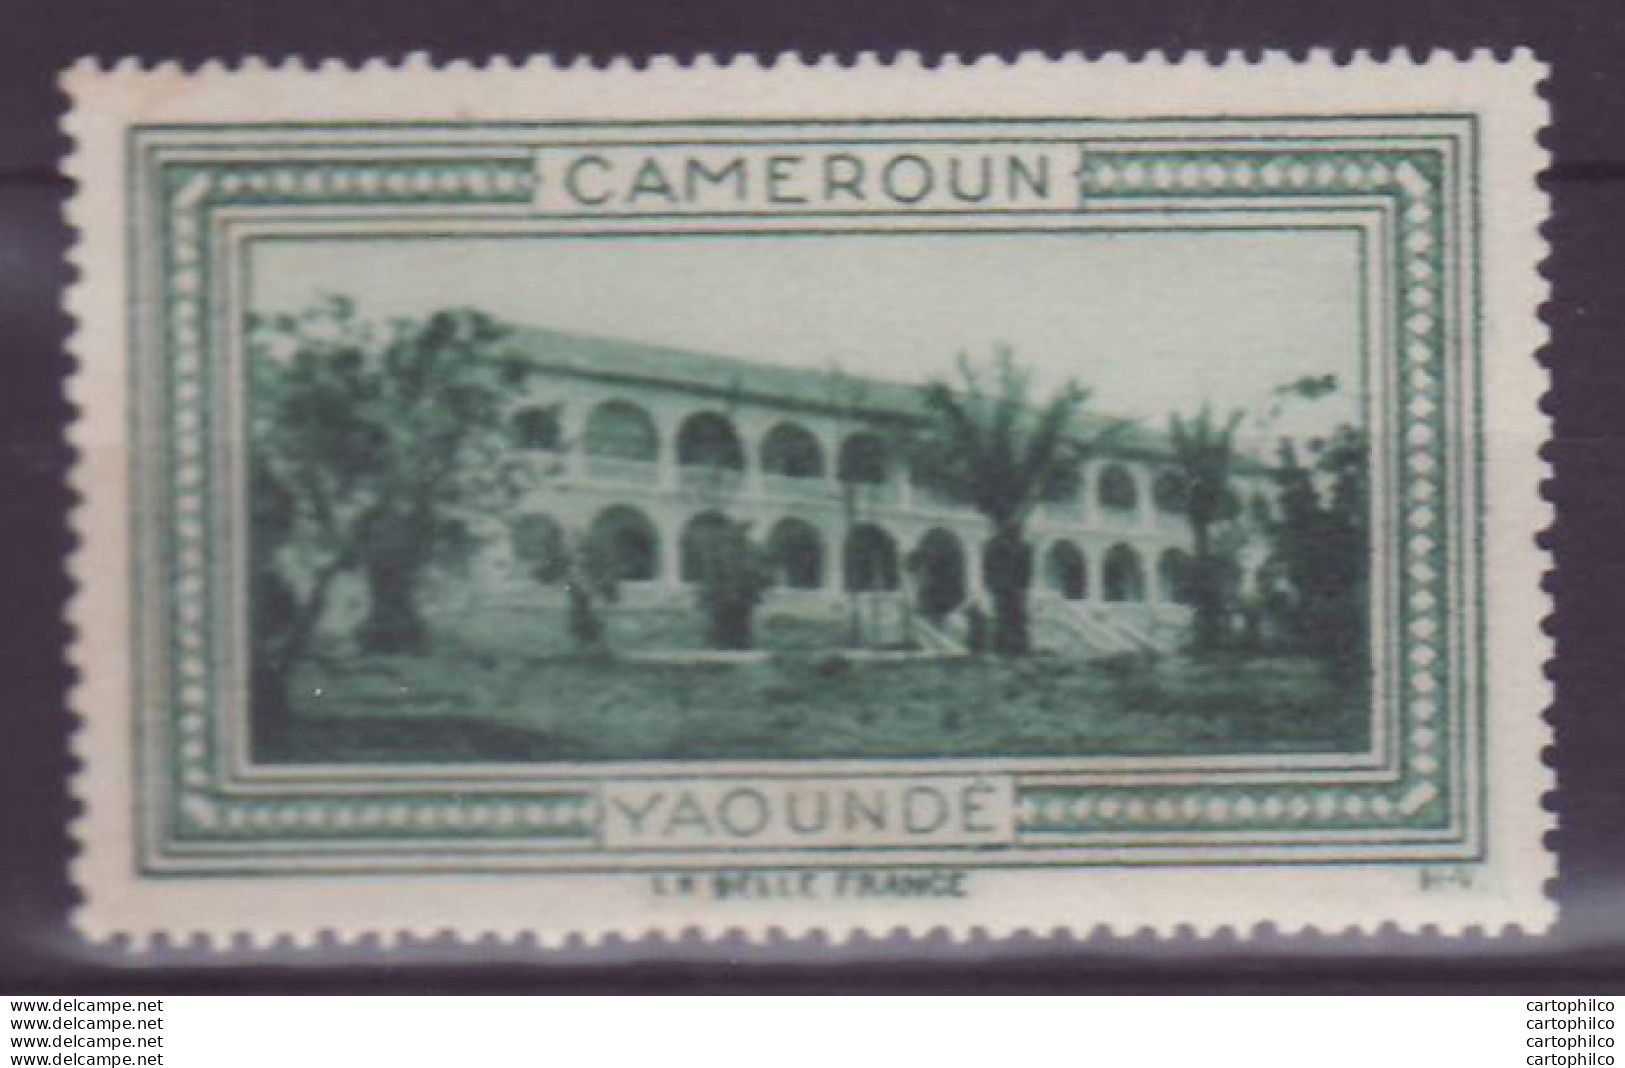 Vignette ** Cameroun Yaounde - Unused Stamps